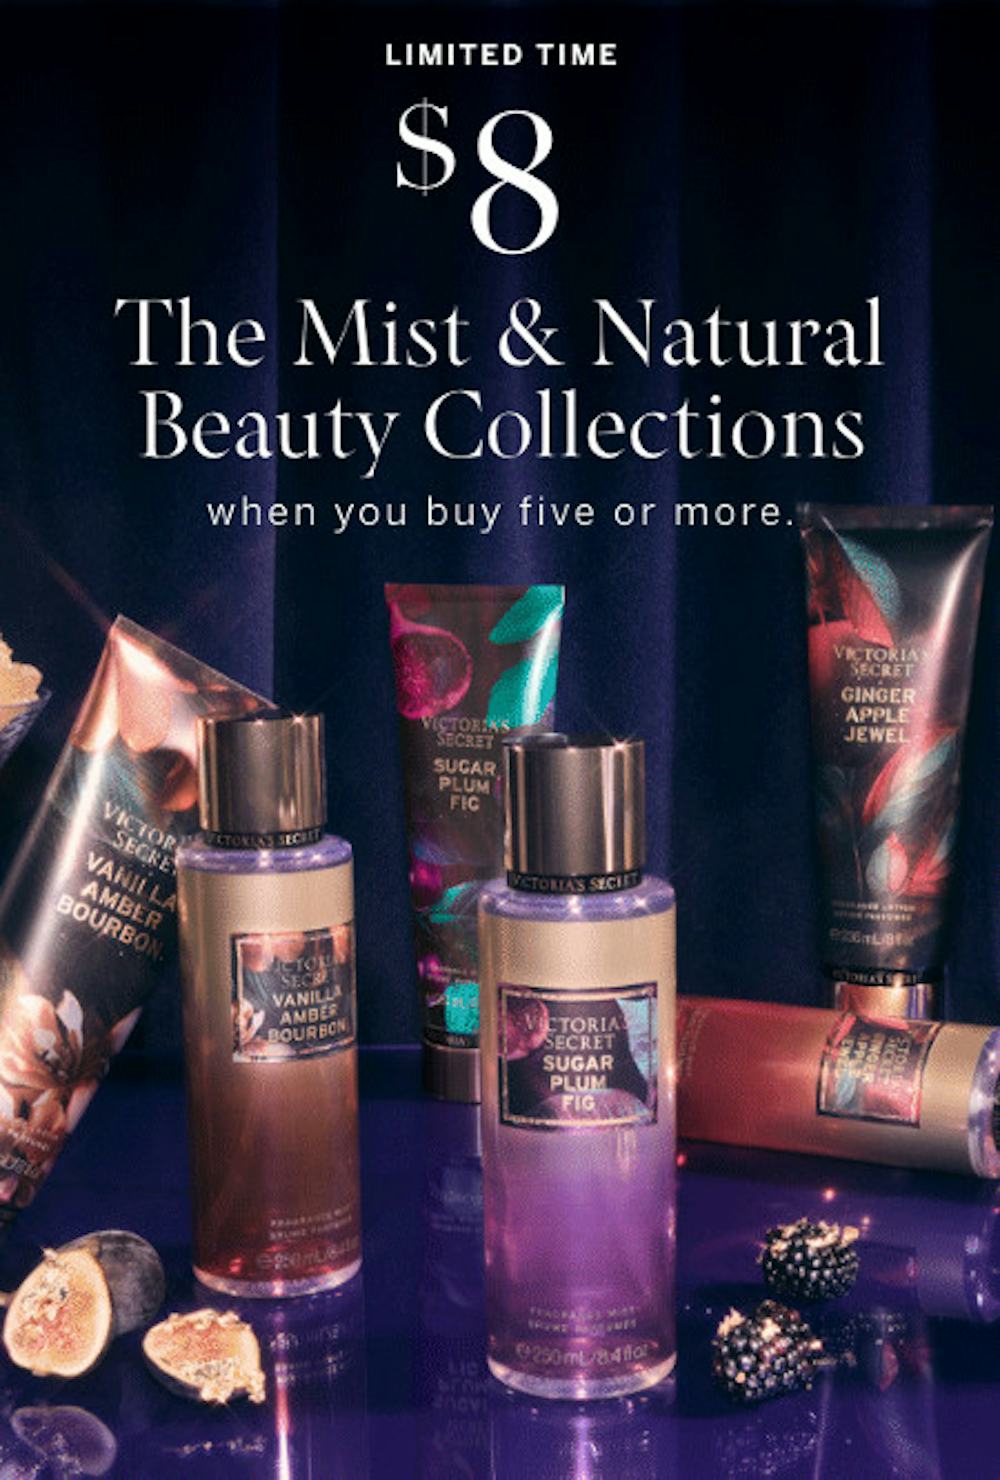 The Mist & Natural Beauty Collections $8